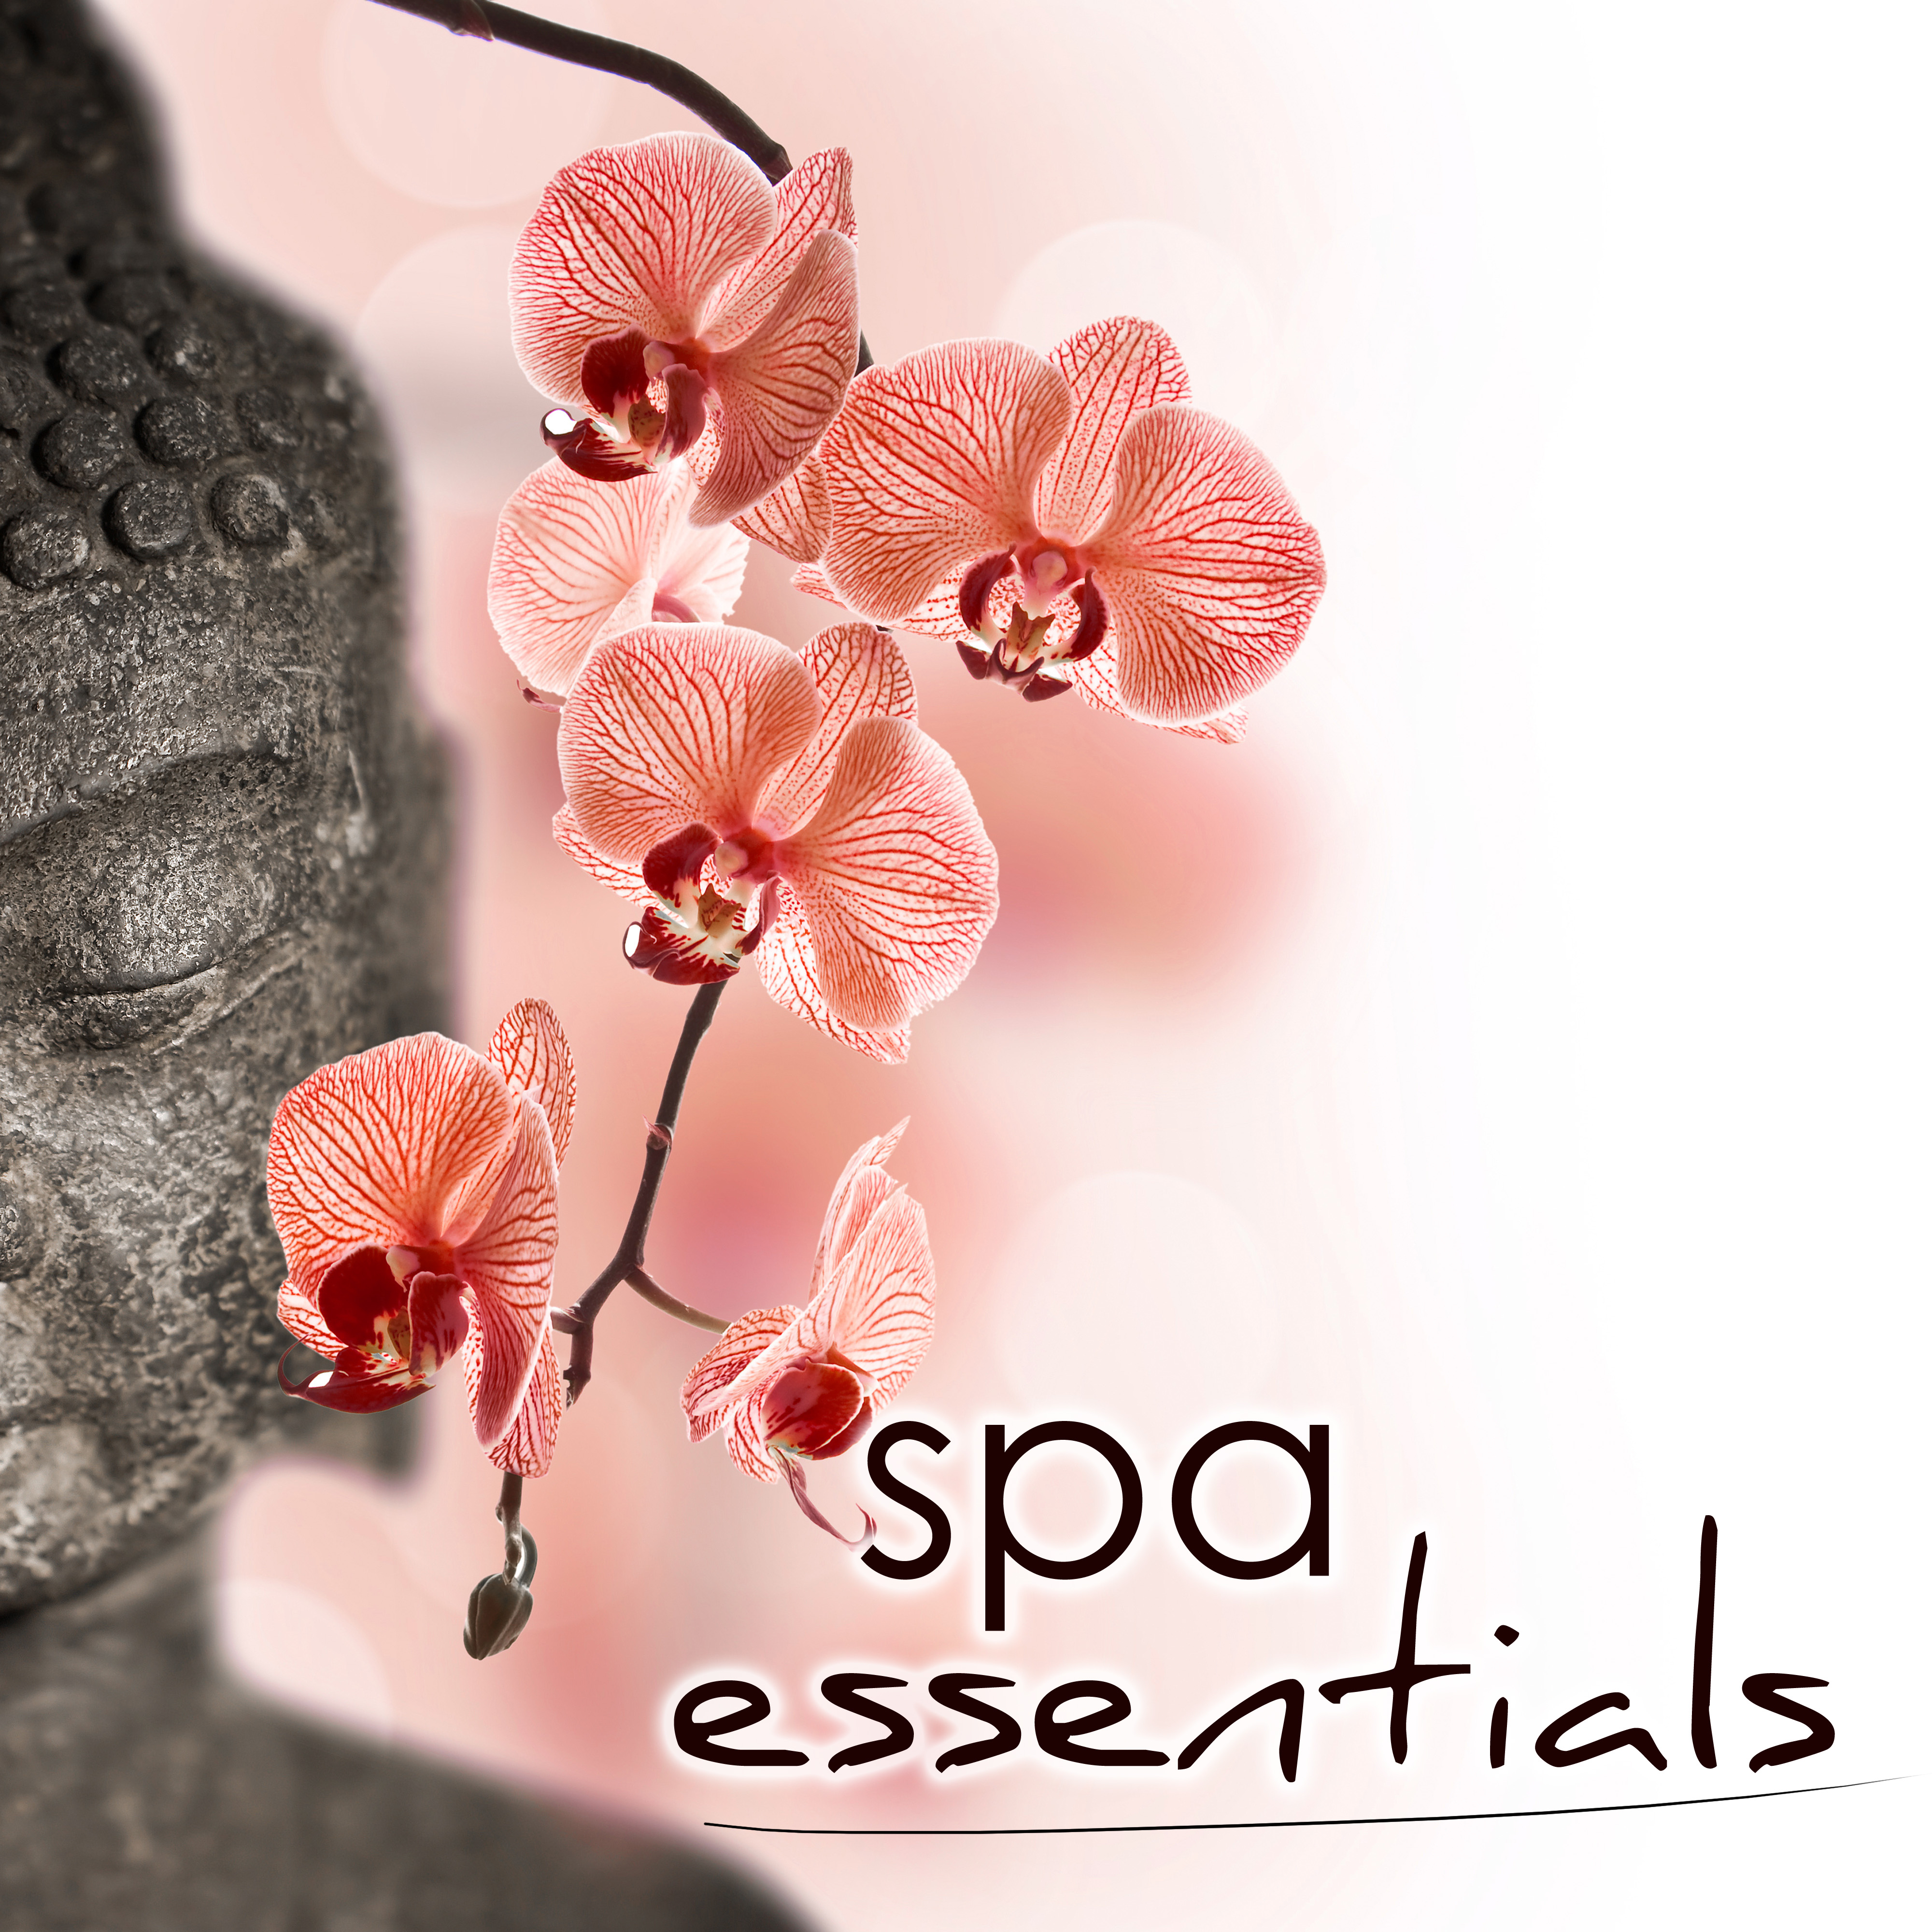 Spa Essentials - Best Spa Music Collection of Relaxing Soothing Sounds for Relaxation, Spa Massage and Beauty Treatments